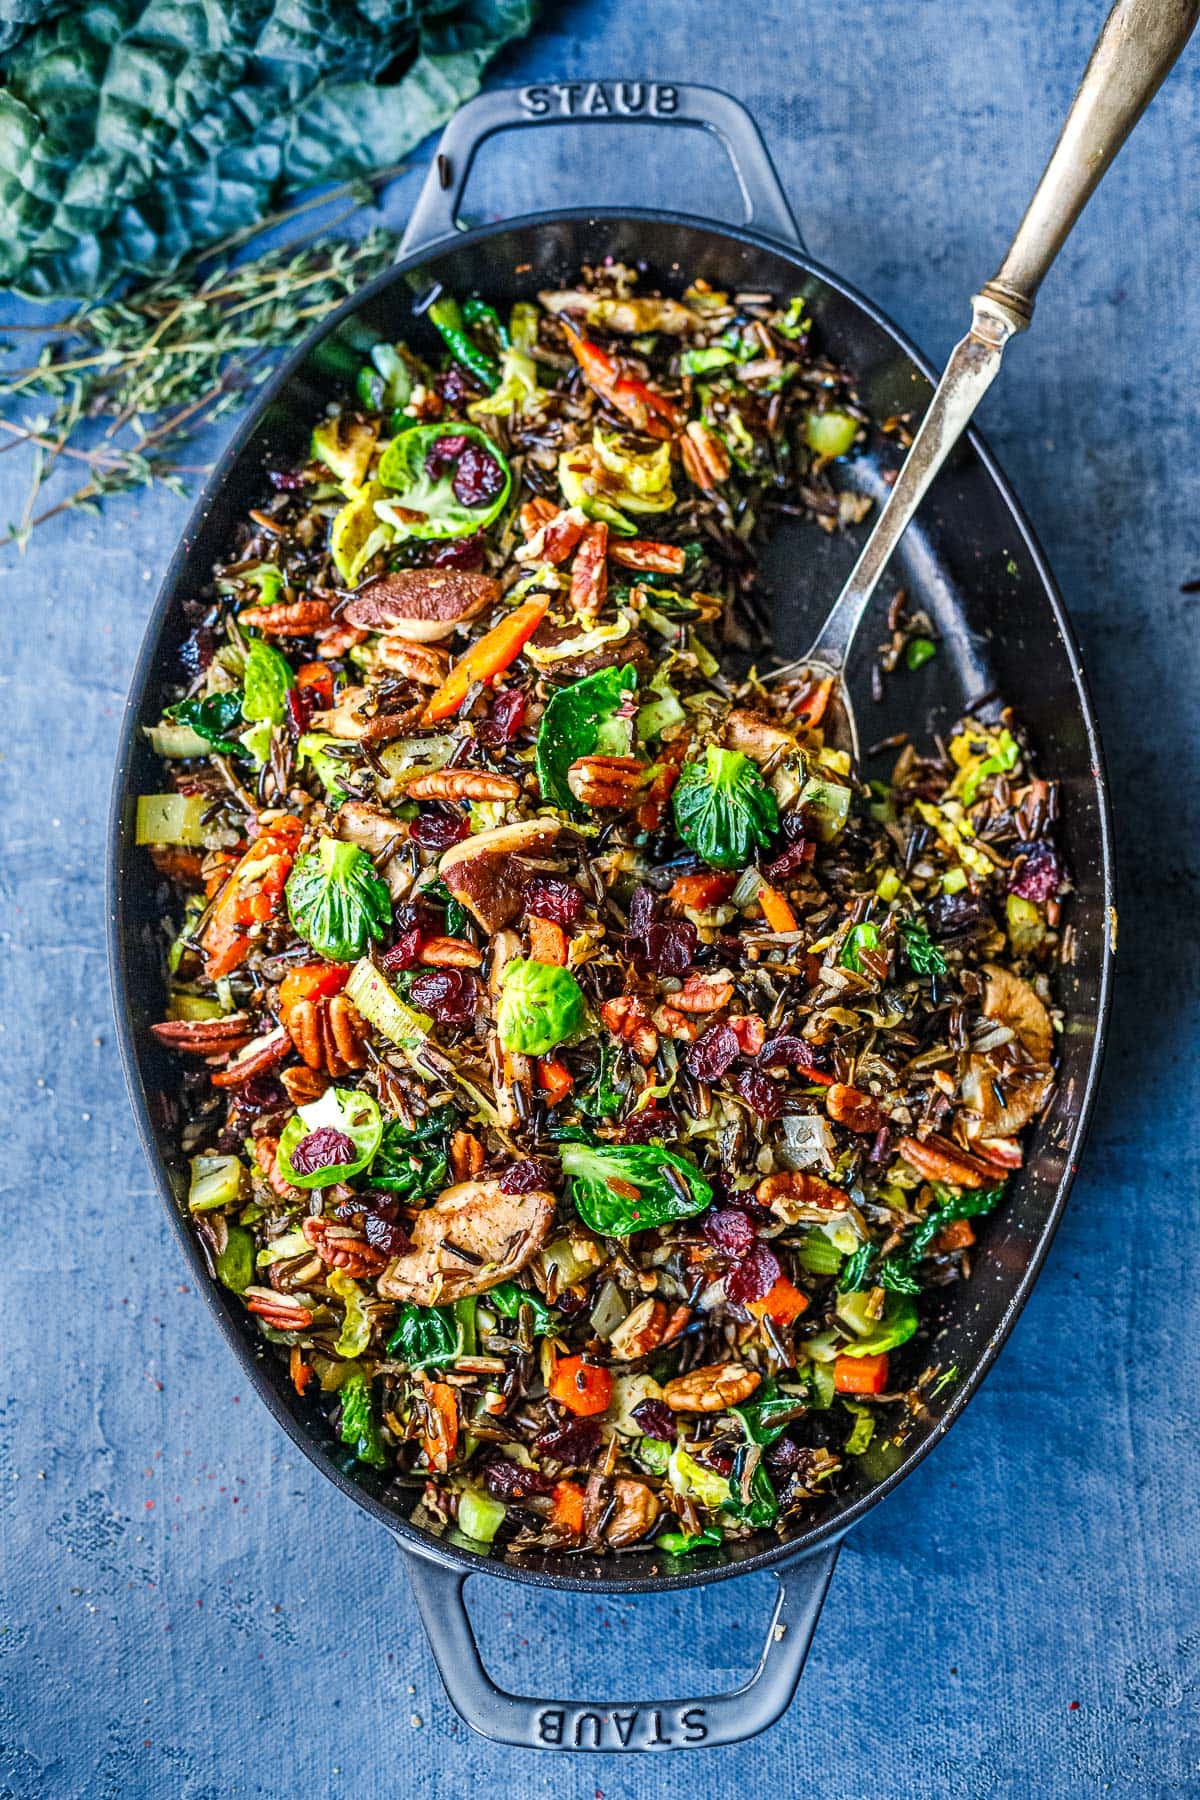 This Wild Rice Pilaf recipe is hearty, textural and savory. Nutty wild rice is paired with mushrooms, pecans, leeks, Brussels sprouts, and craisins. A lovely colorful side dish that is vegan and gluten-free.